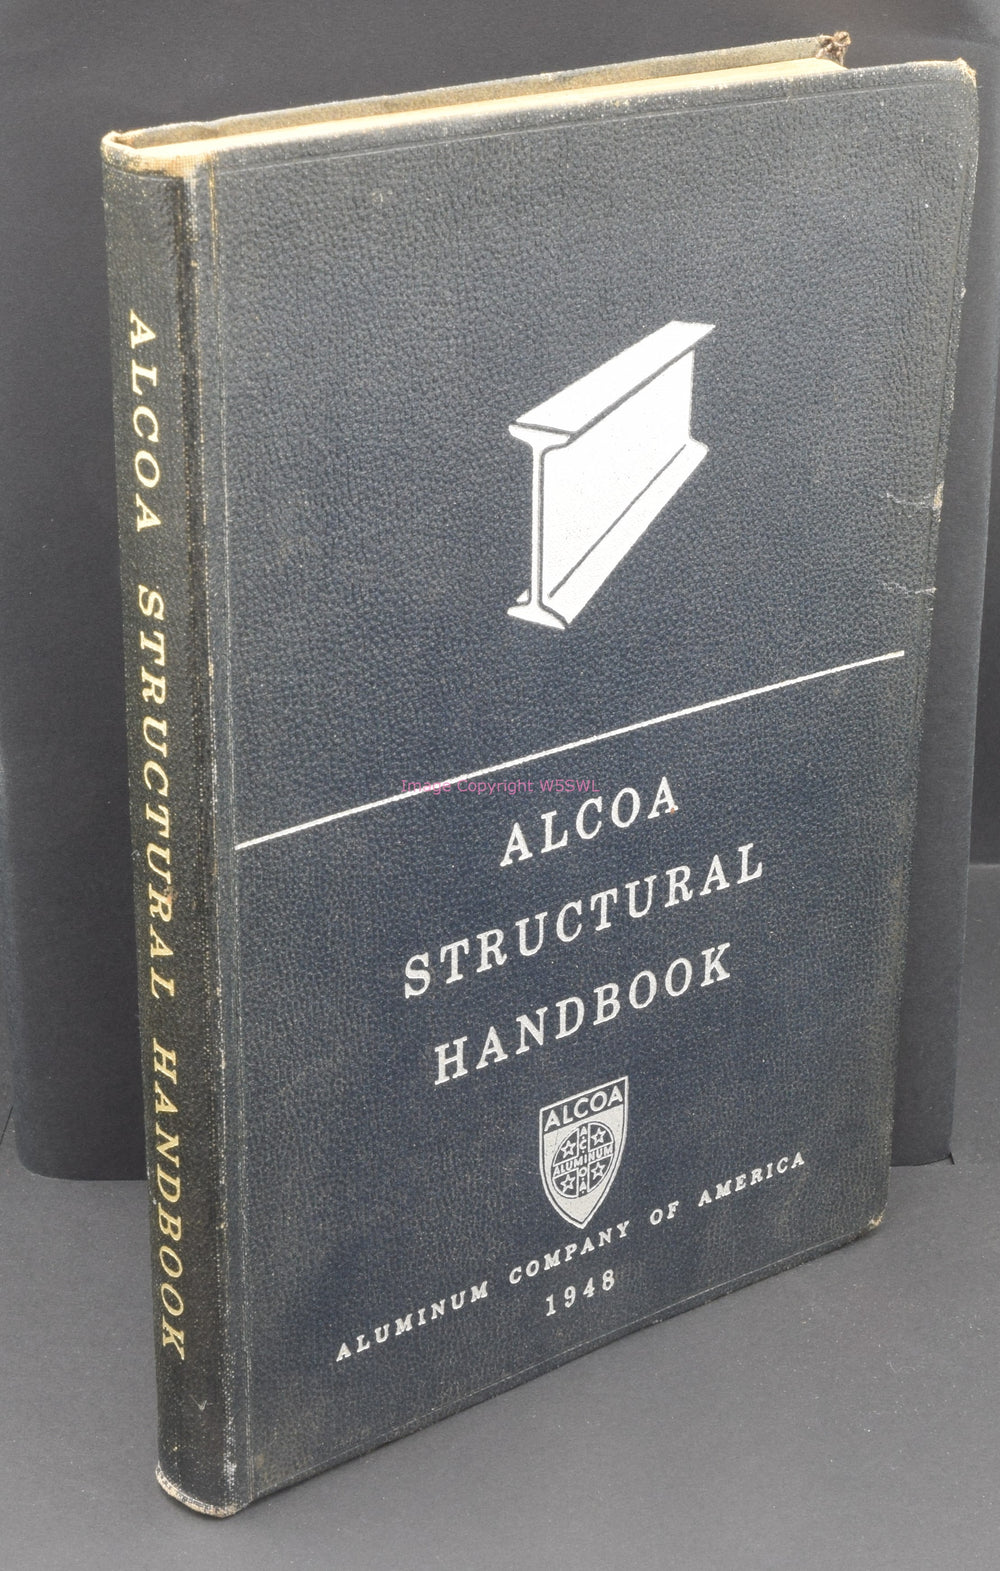 ALCOA Structural Handbook 1948 - Dave's Hobby Shop by W5SWL